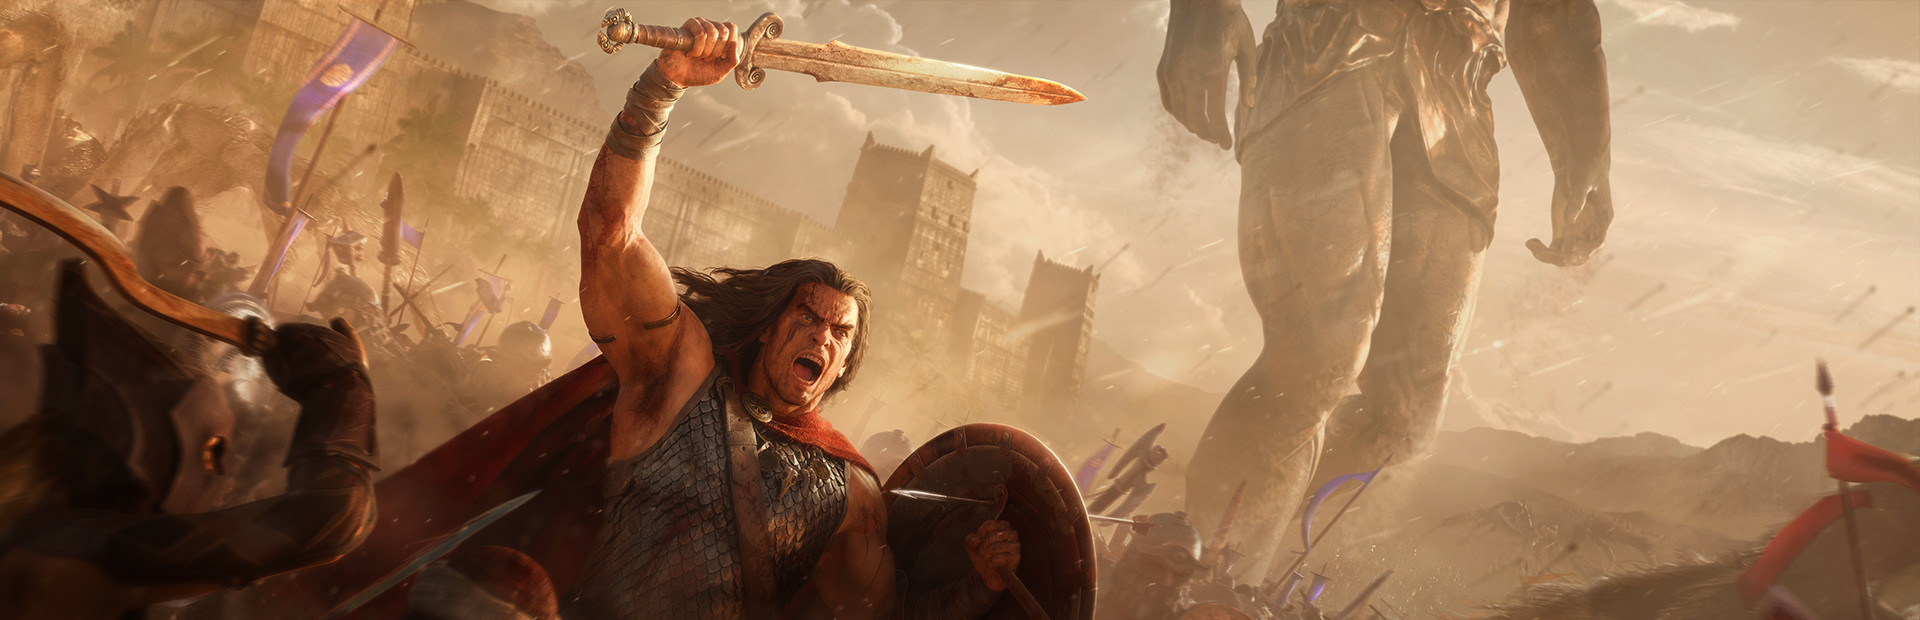 Conan Unconquered cover image